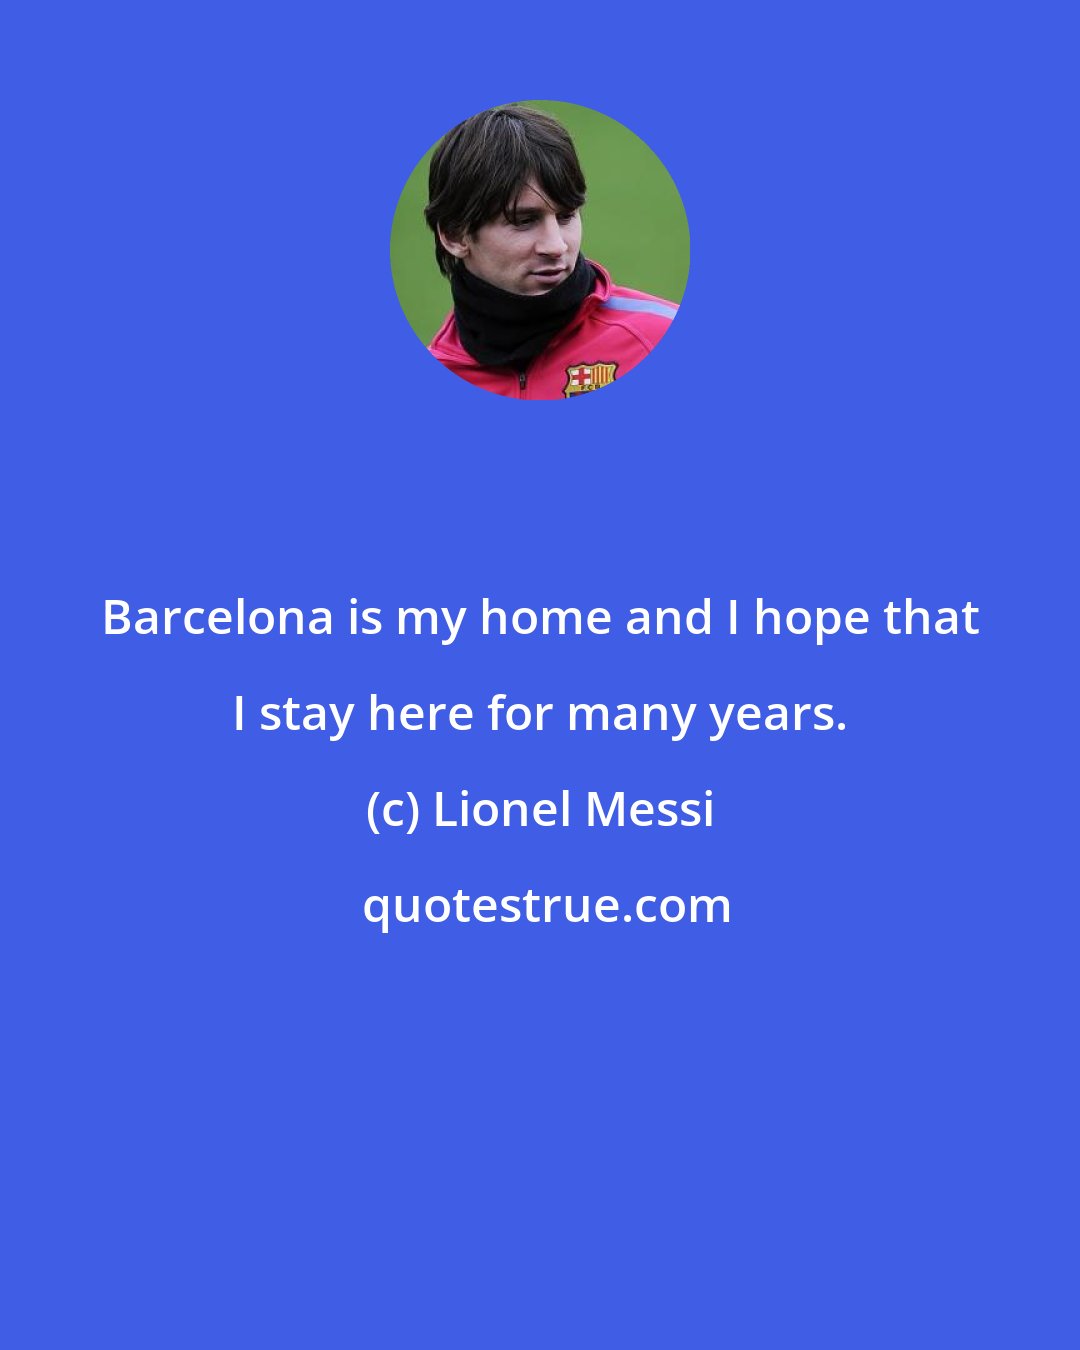 Lionel Messi: Barcelona is my home and I hope that I stay here for many years.